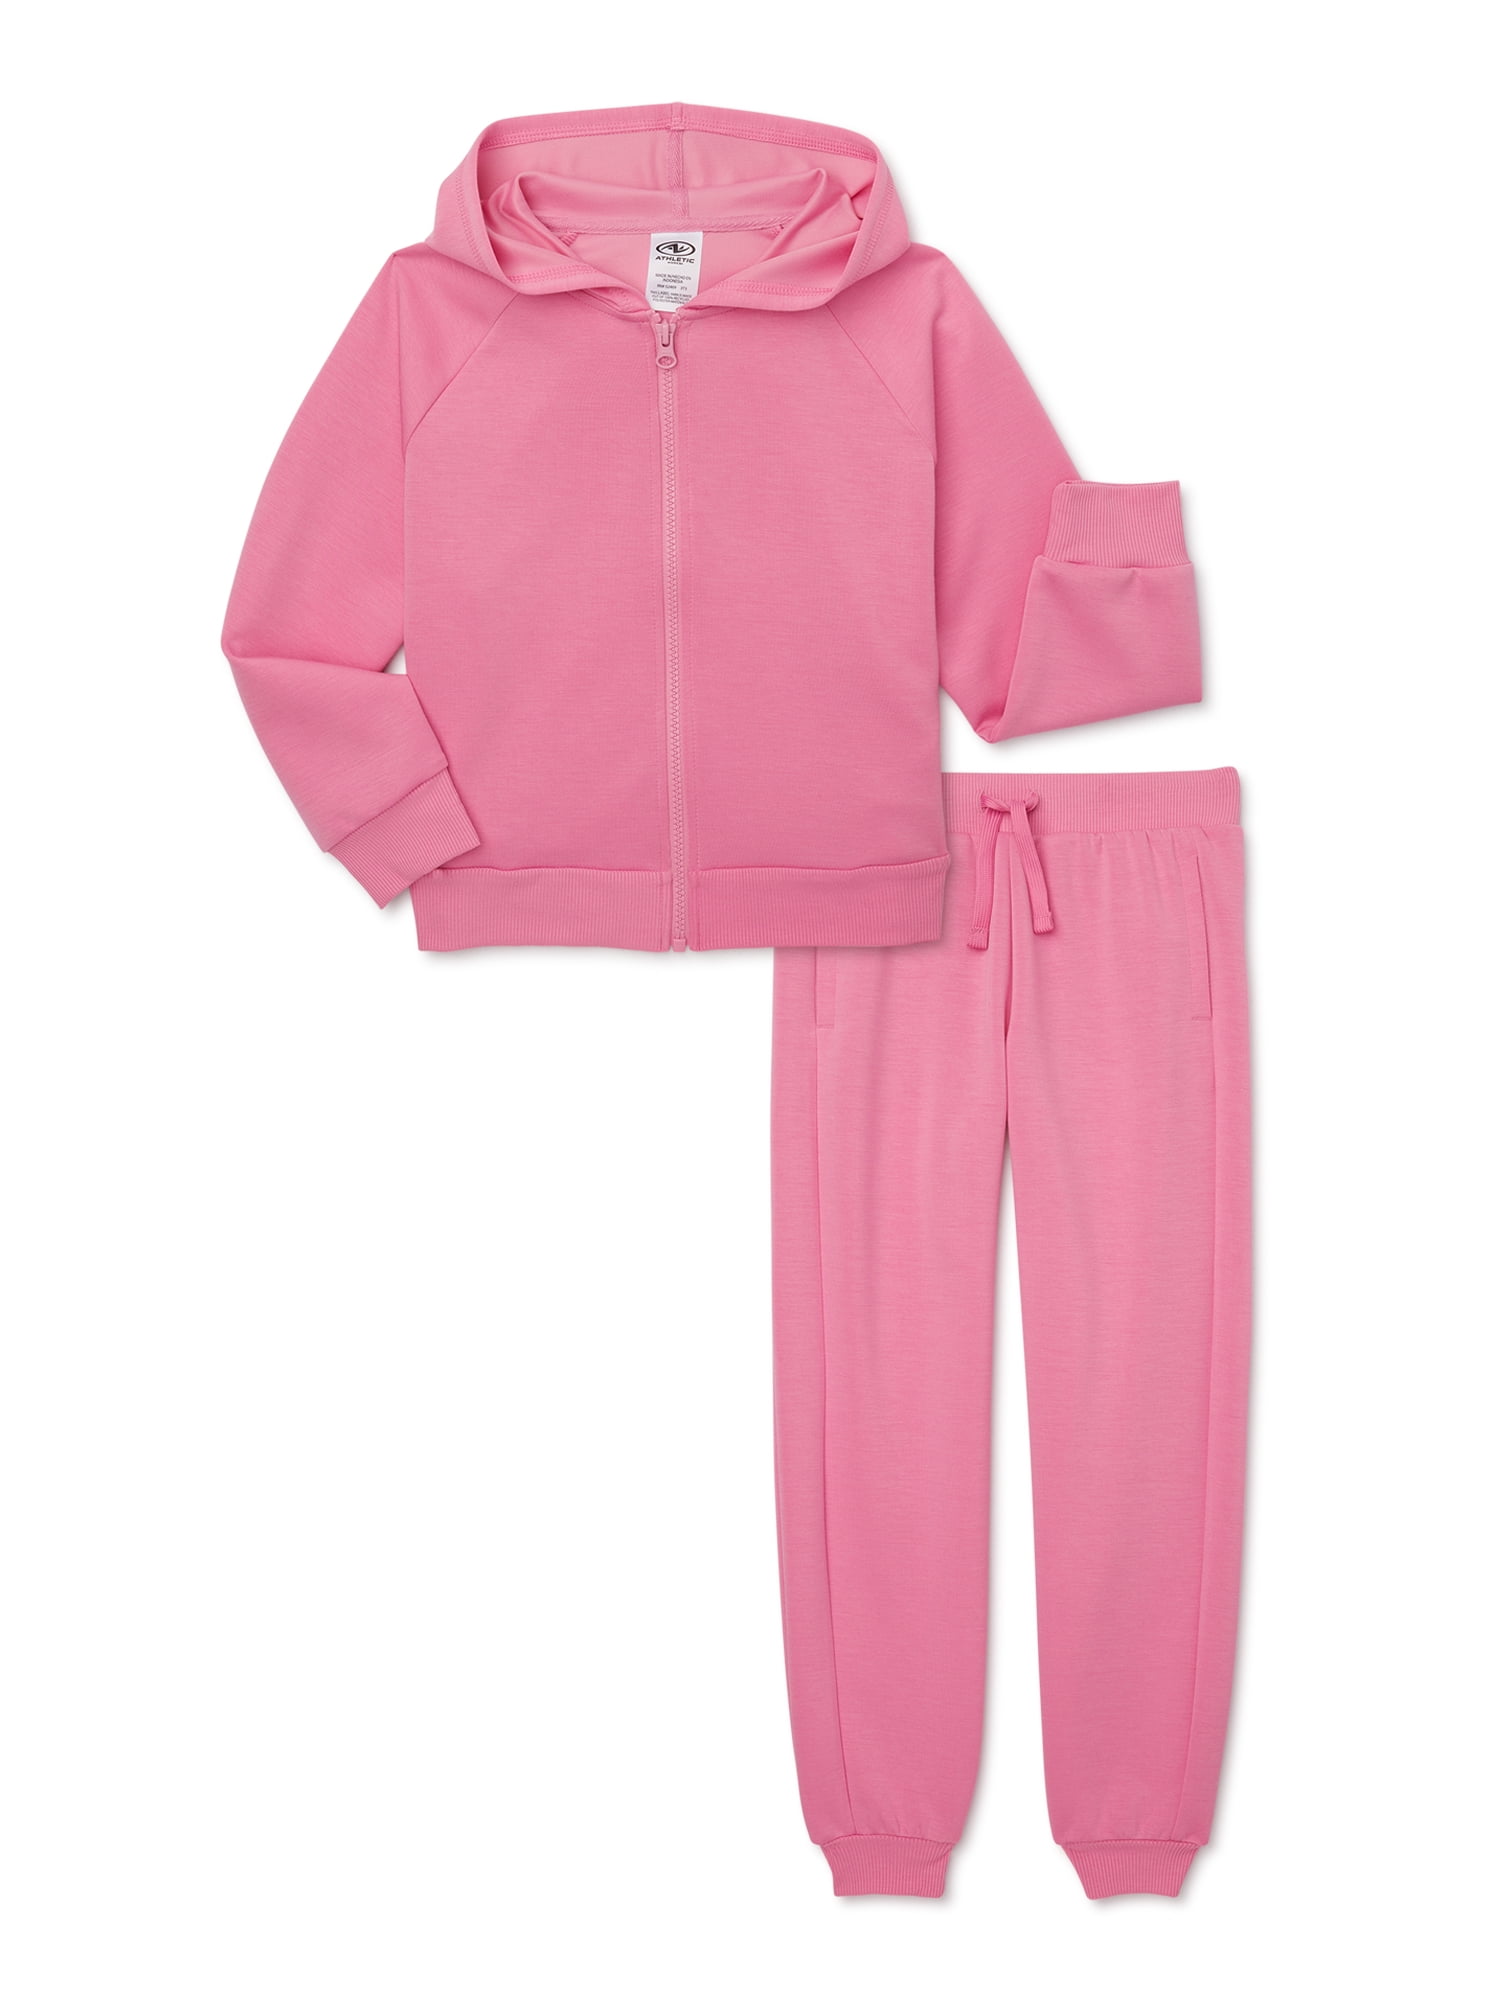 Athletic Works Girls Scuba Zip Hoodie and Joggers Set, Sizes 4-18